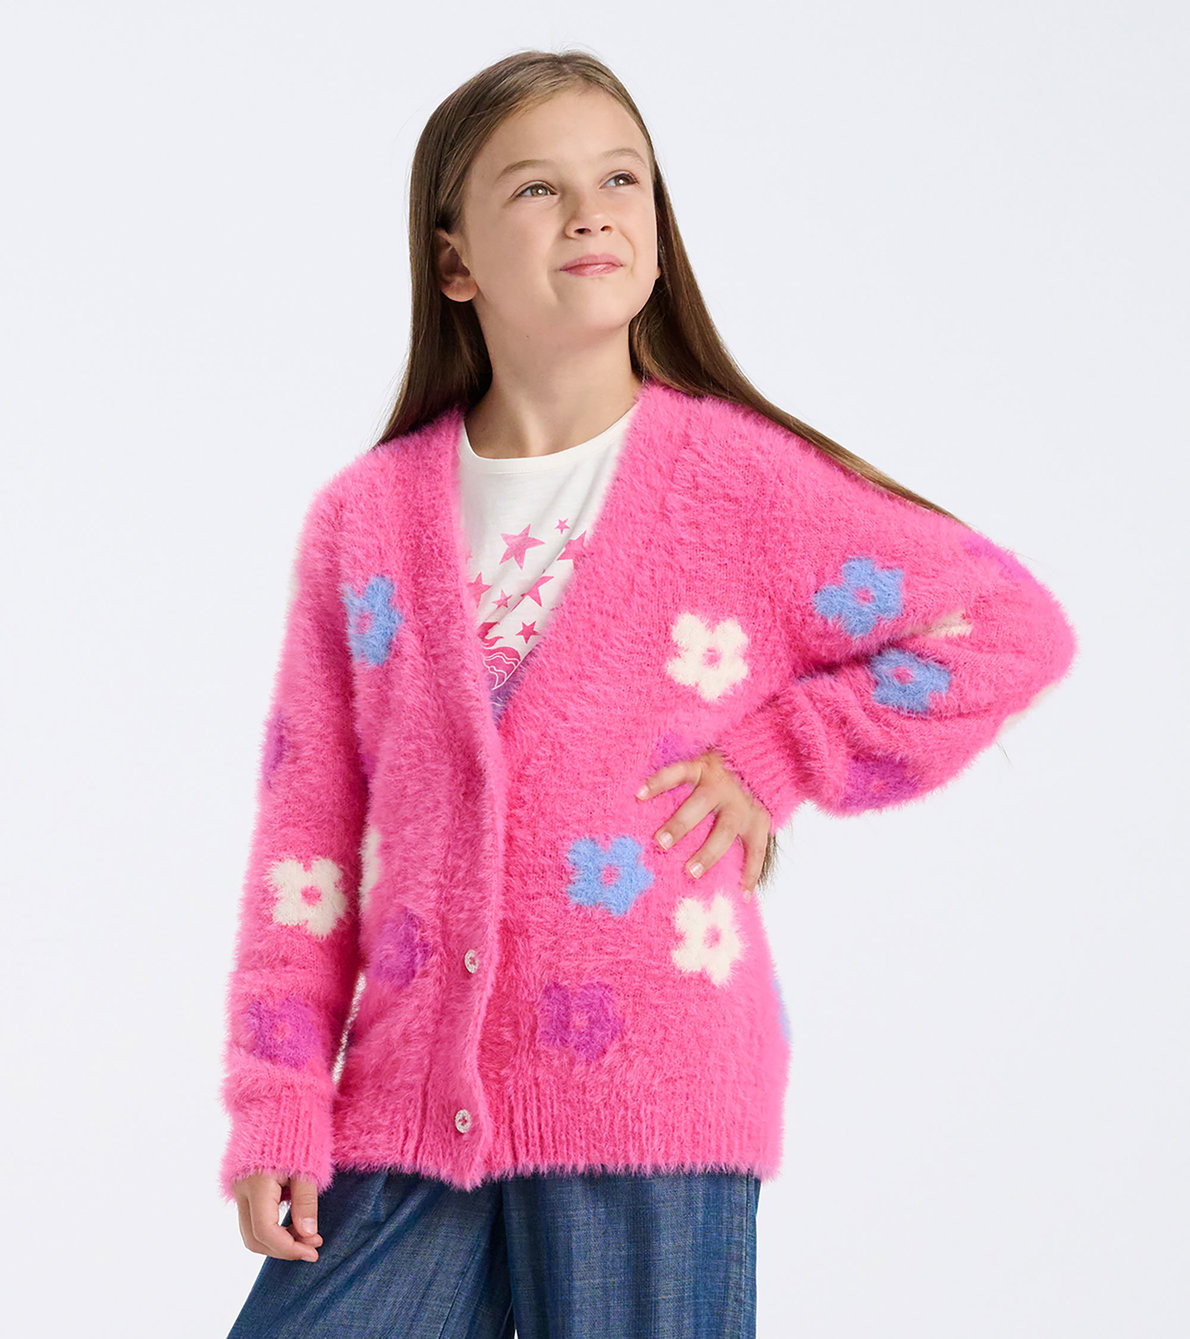 View larger image of Girls Soft Floral Cardigan